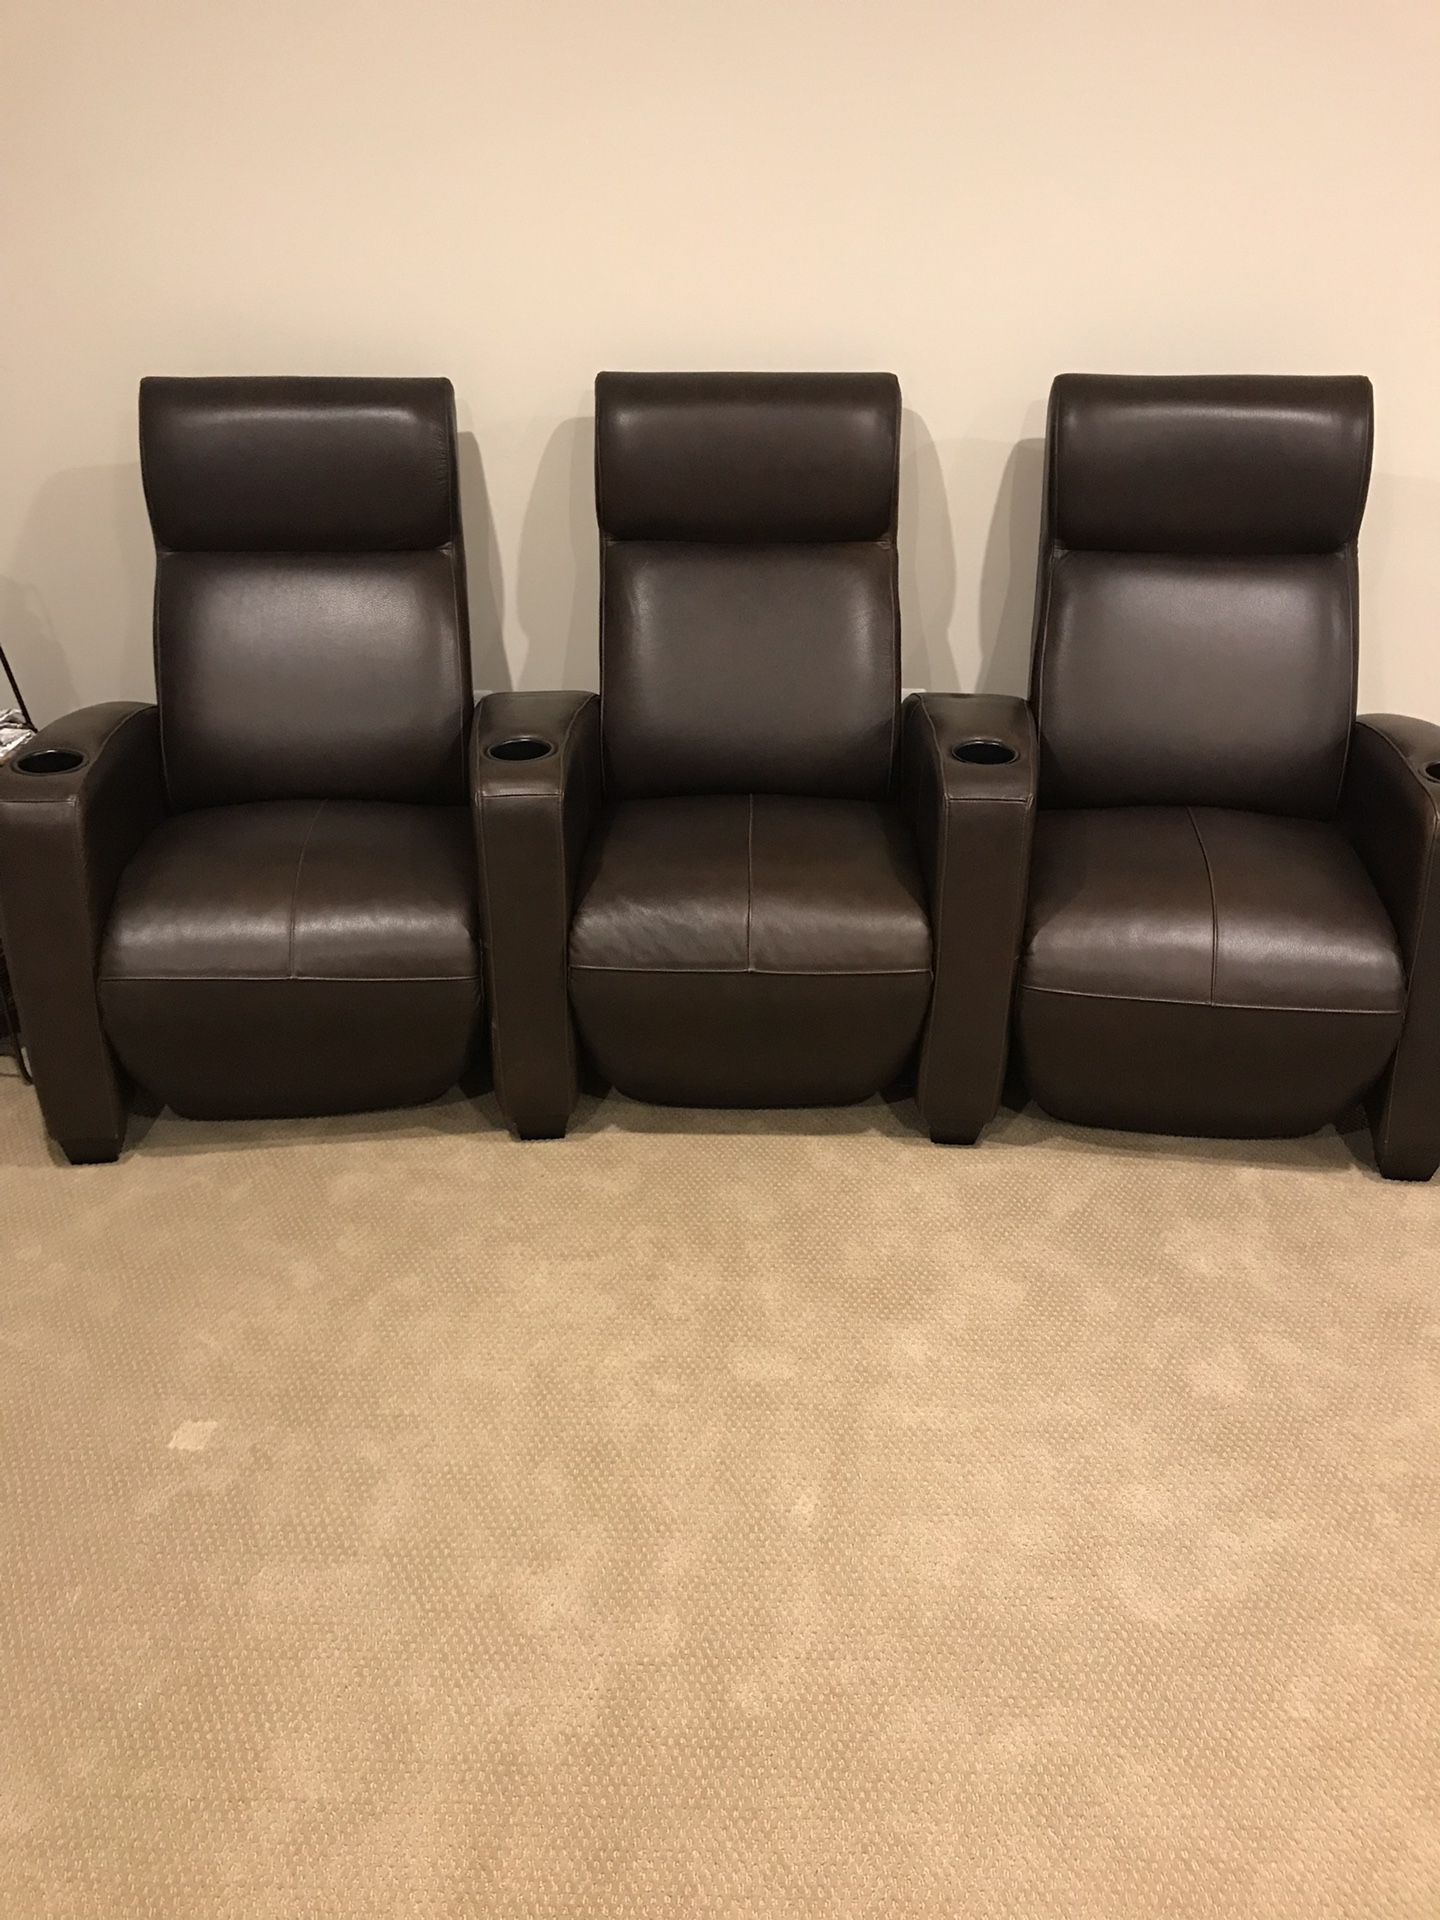 Arhaus leather theater chairs — like new